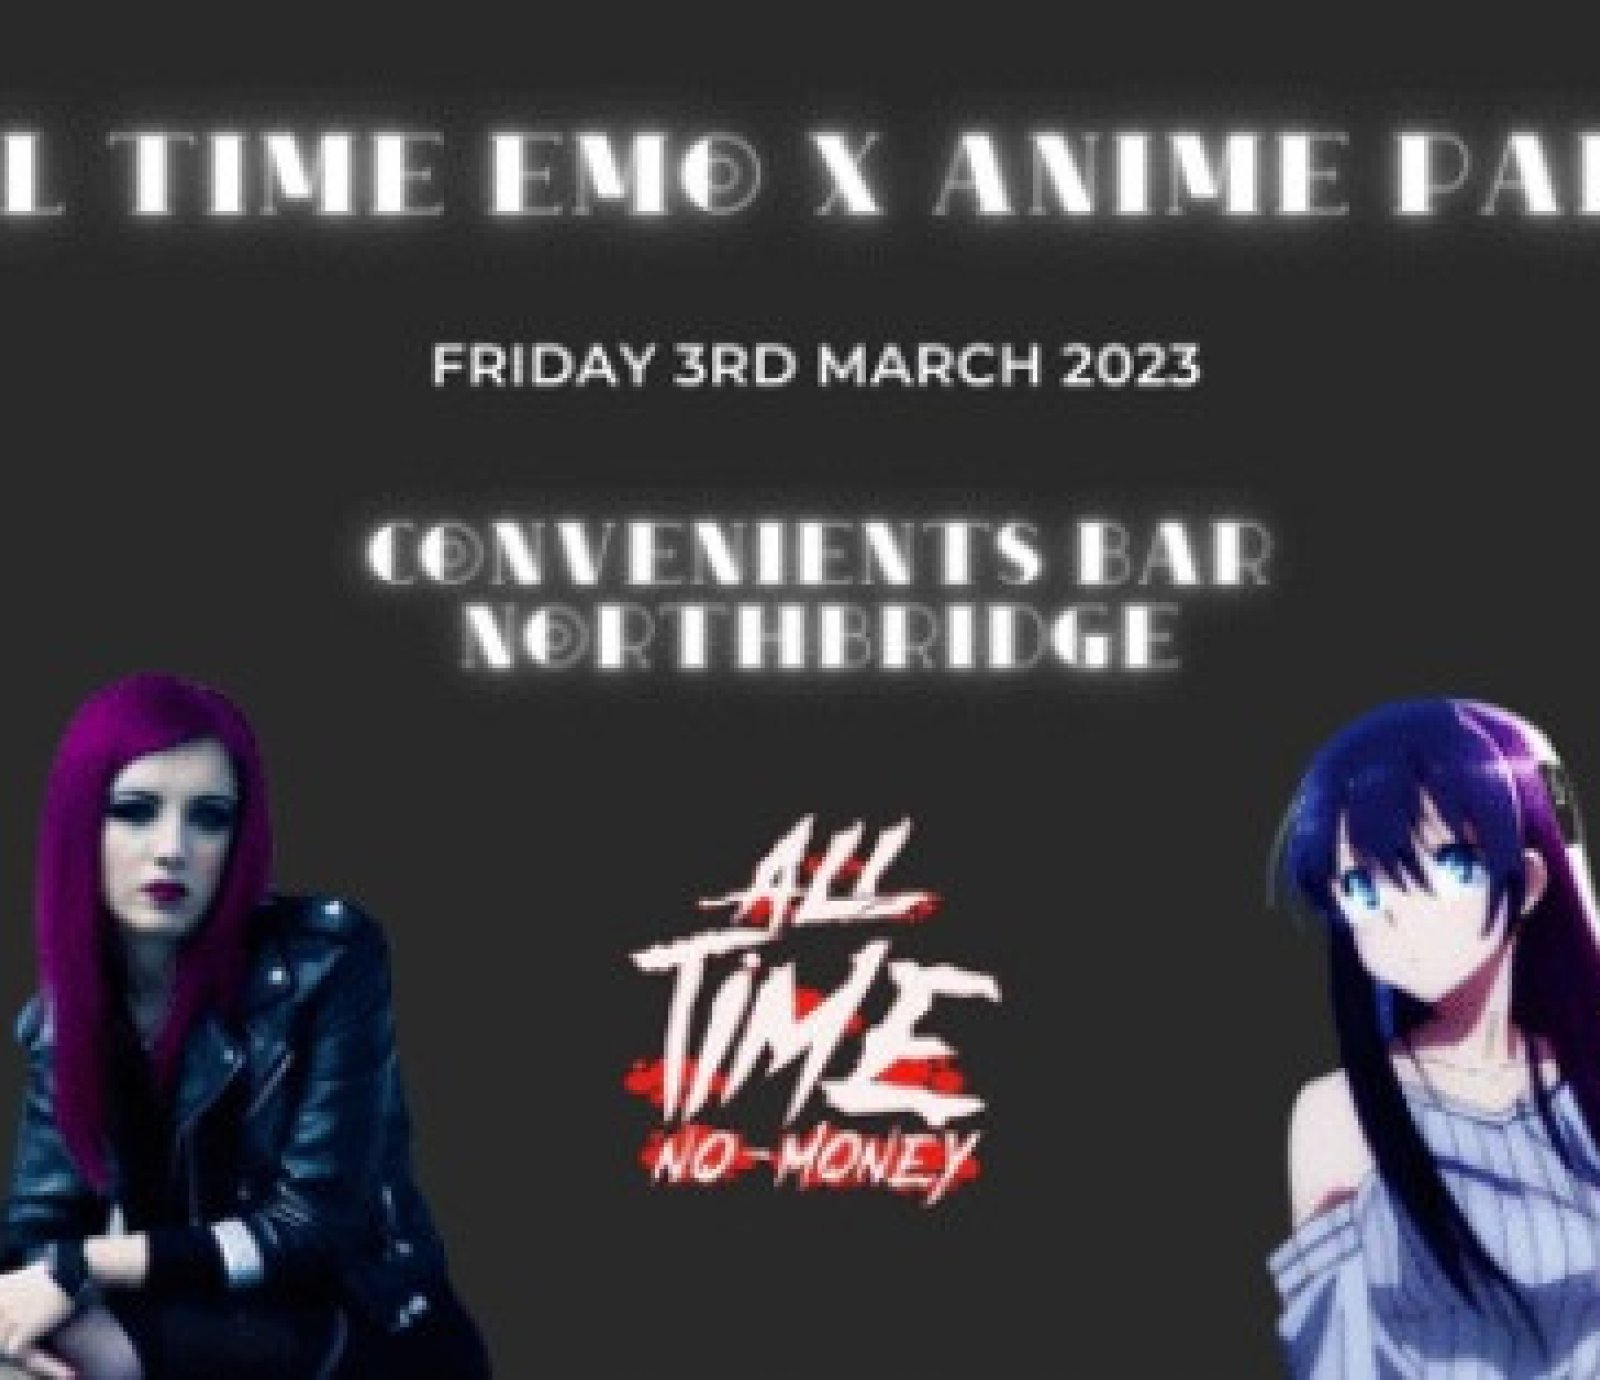 All Time Emo x Anime Party